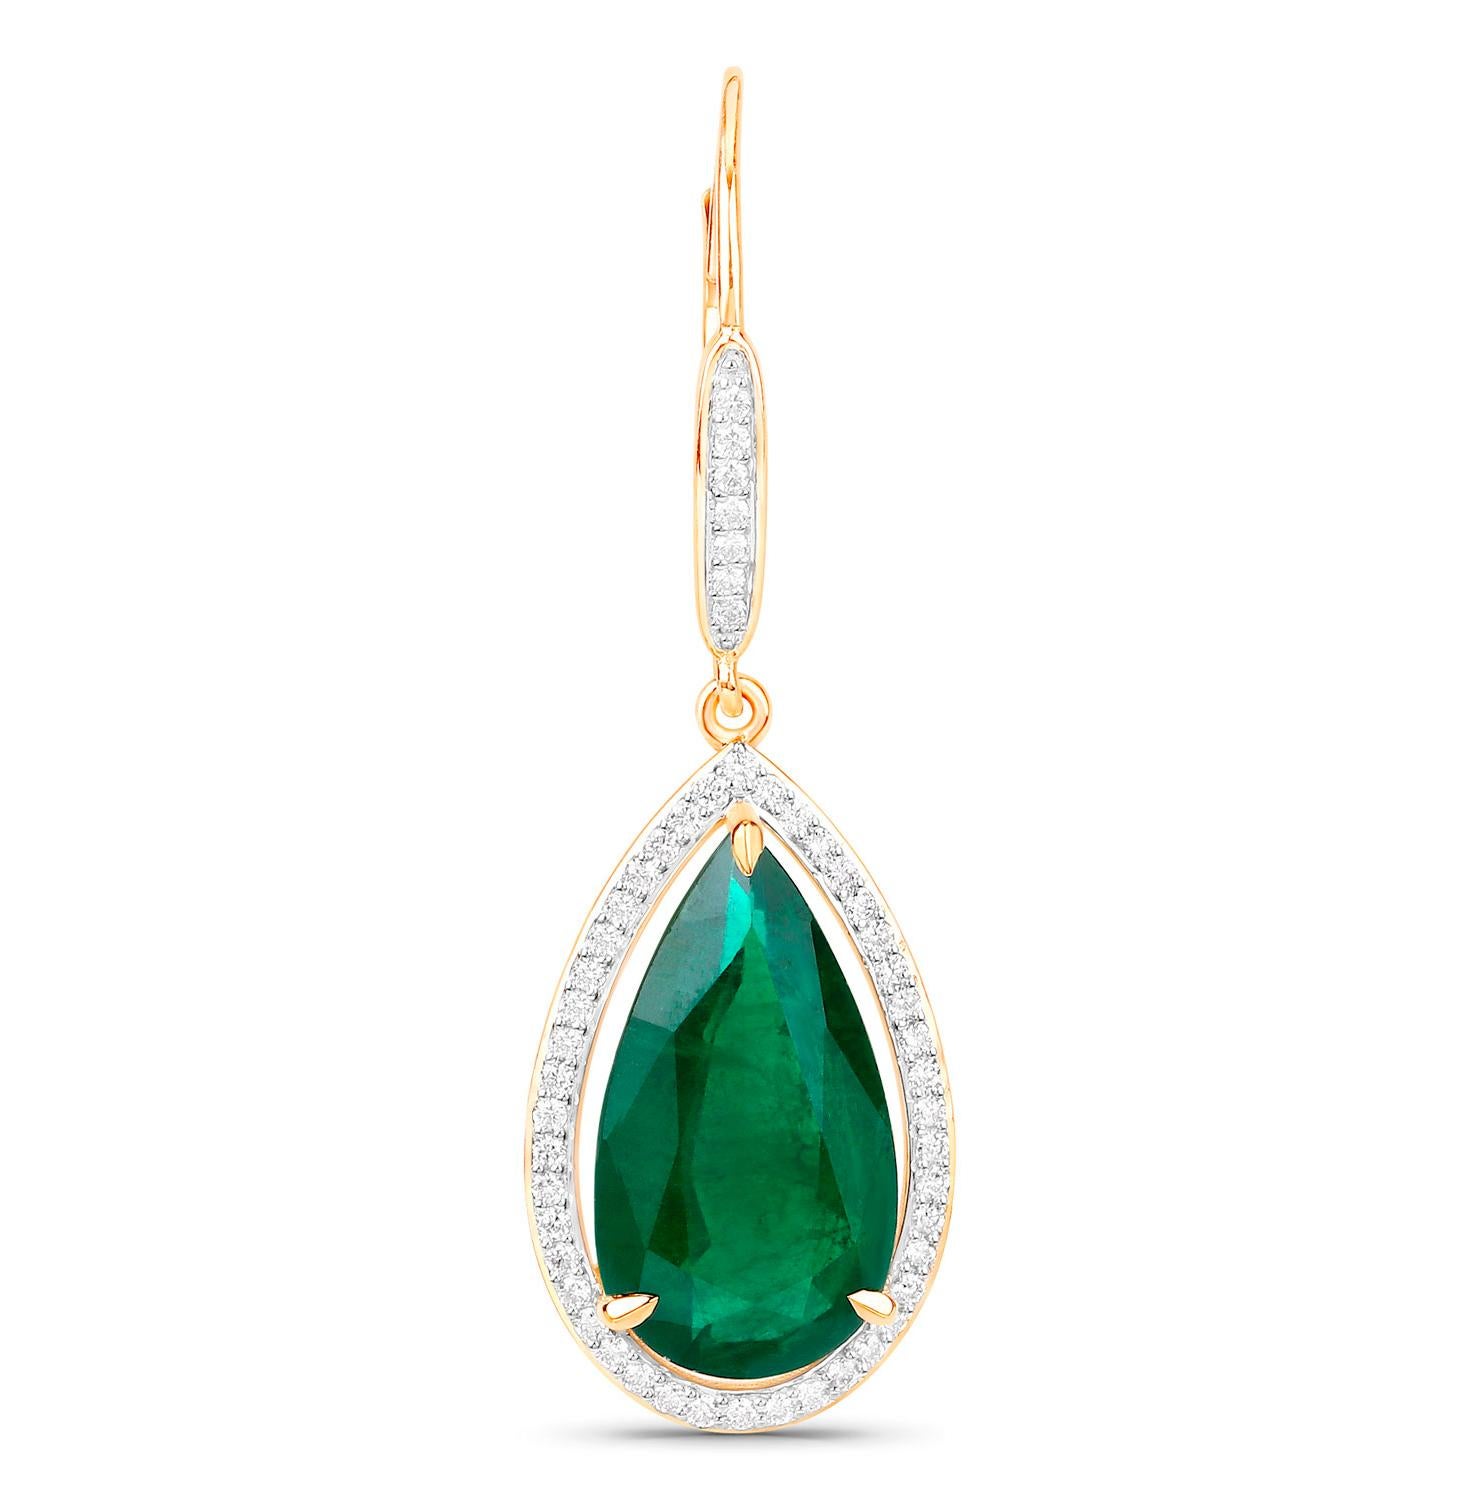 IGI Certified Zambian Emerald Dangle Earrings Diamonds 16.15 Carats 14K Yellow G In Excellent Condition For Sale In Laguna Niguel, CA